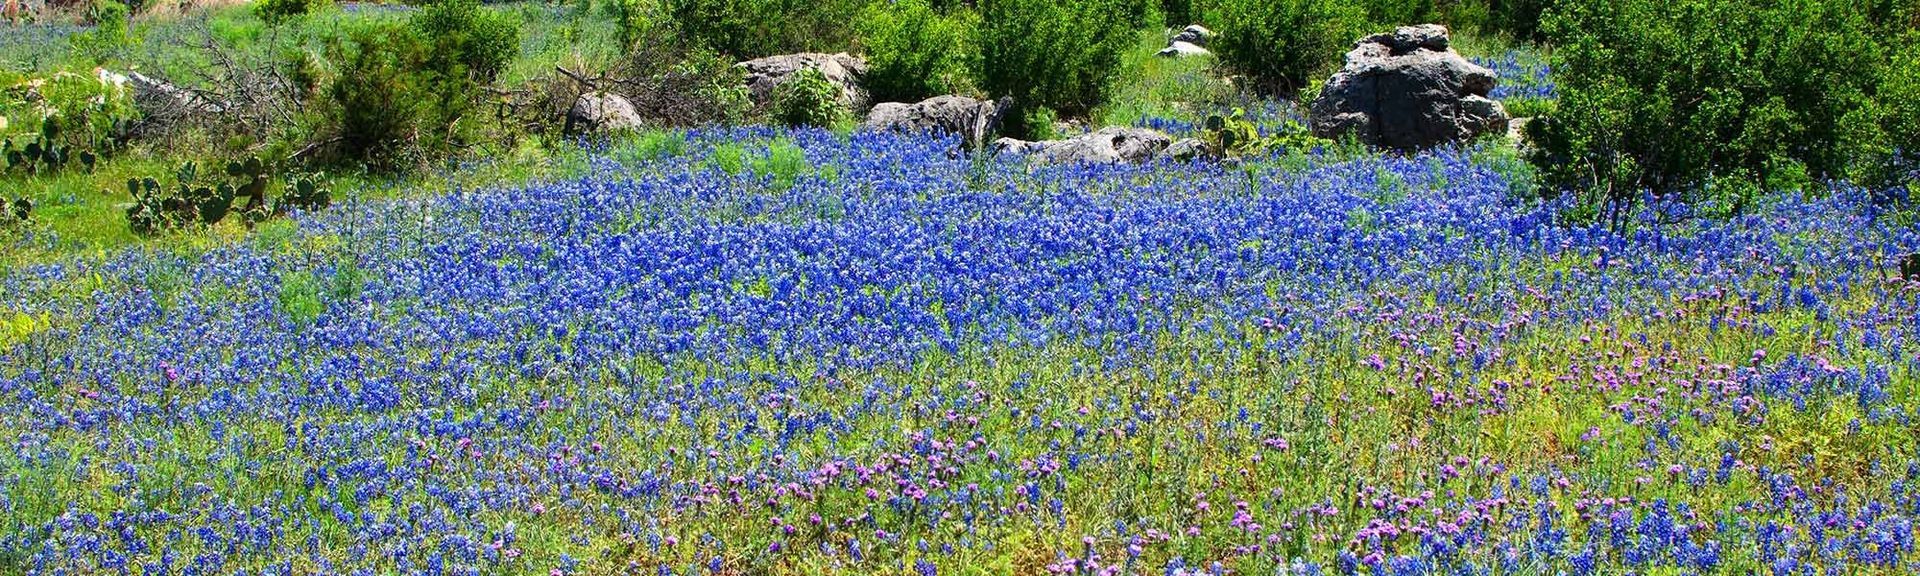 A field of blue flowers surrounded by greenery and rocks.